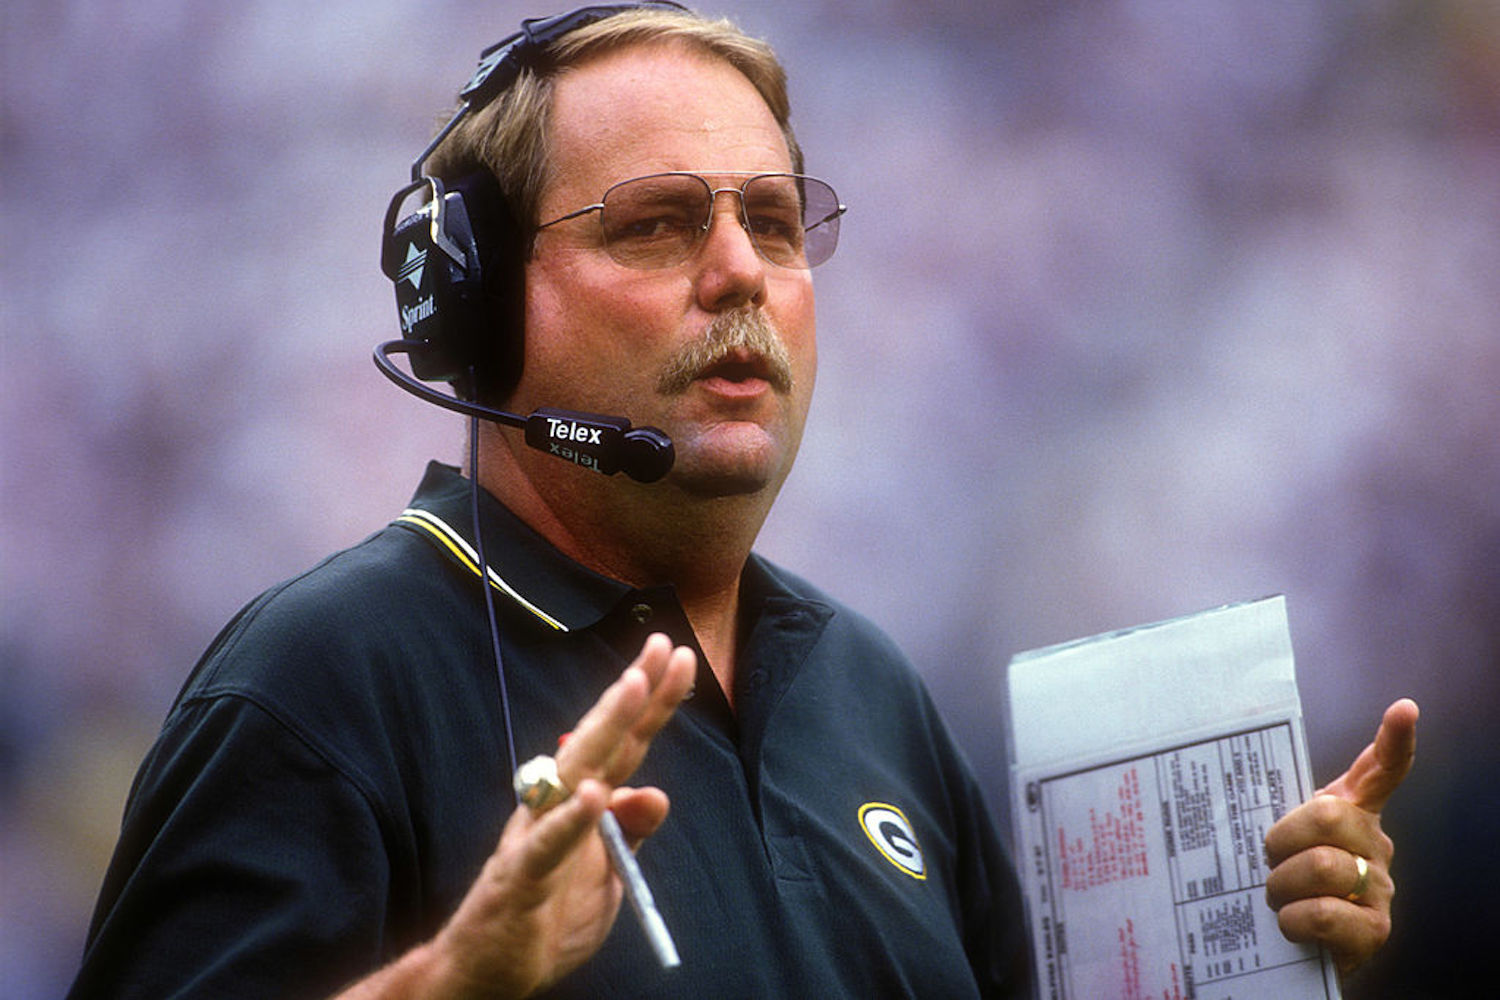 Mike Holmgren, who coached the Packers for seven years, just lit into President Trump for his handling of the coronavirus.